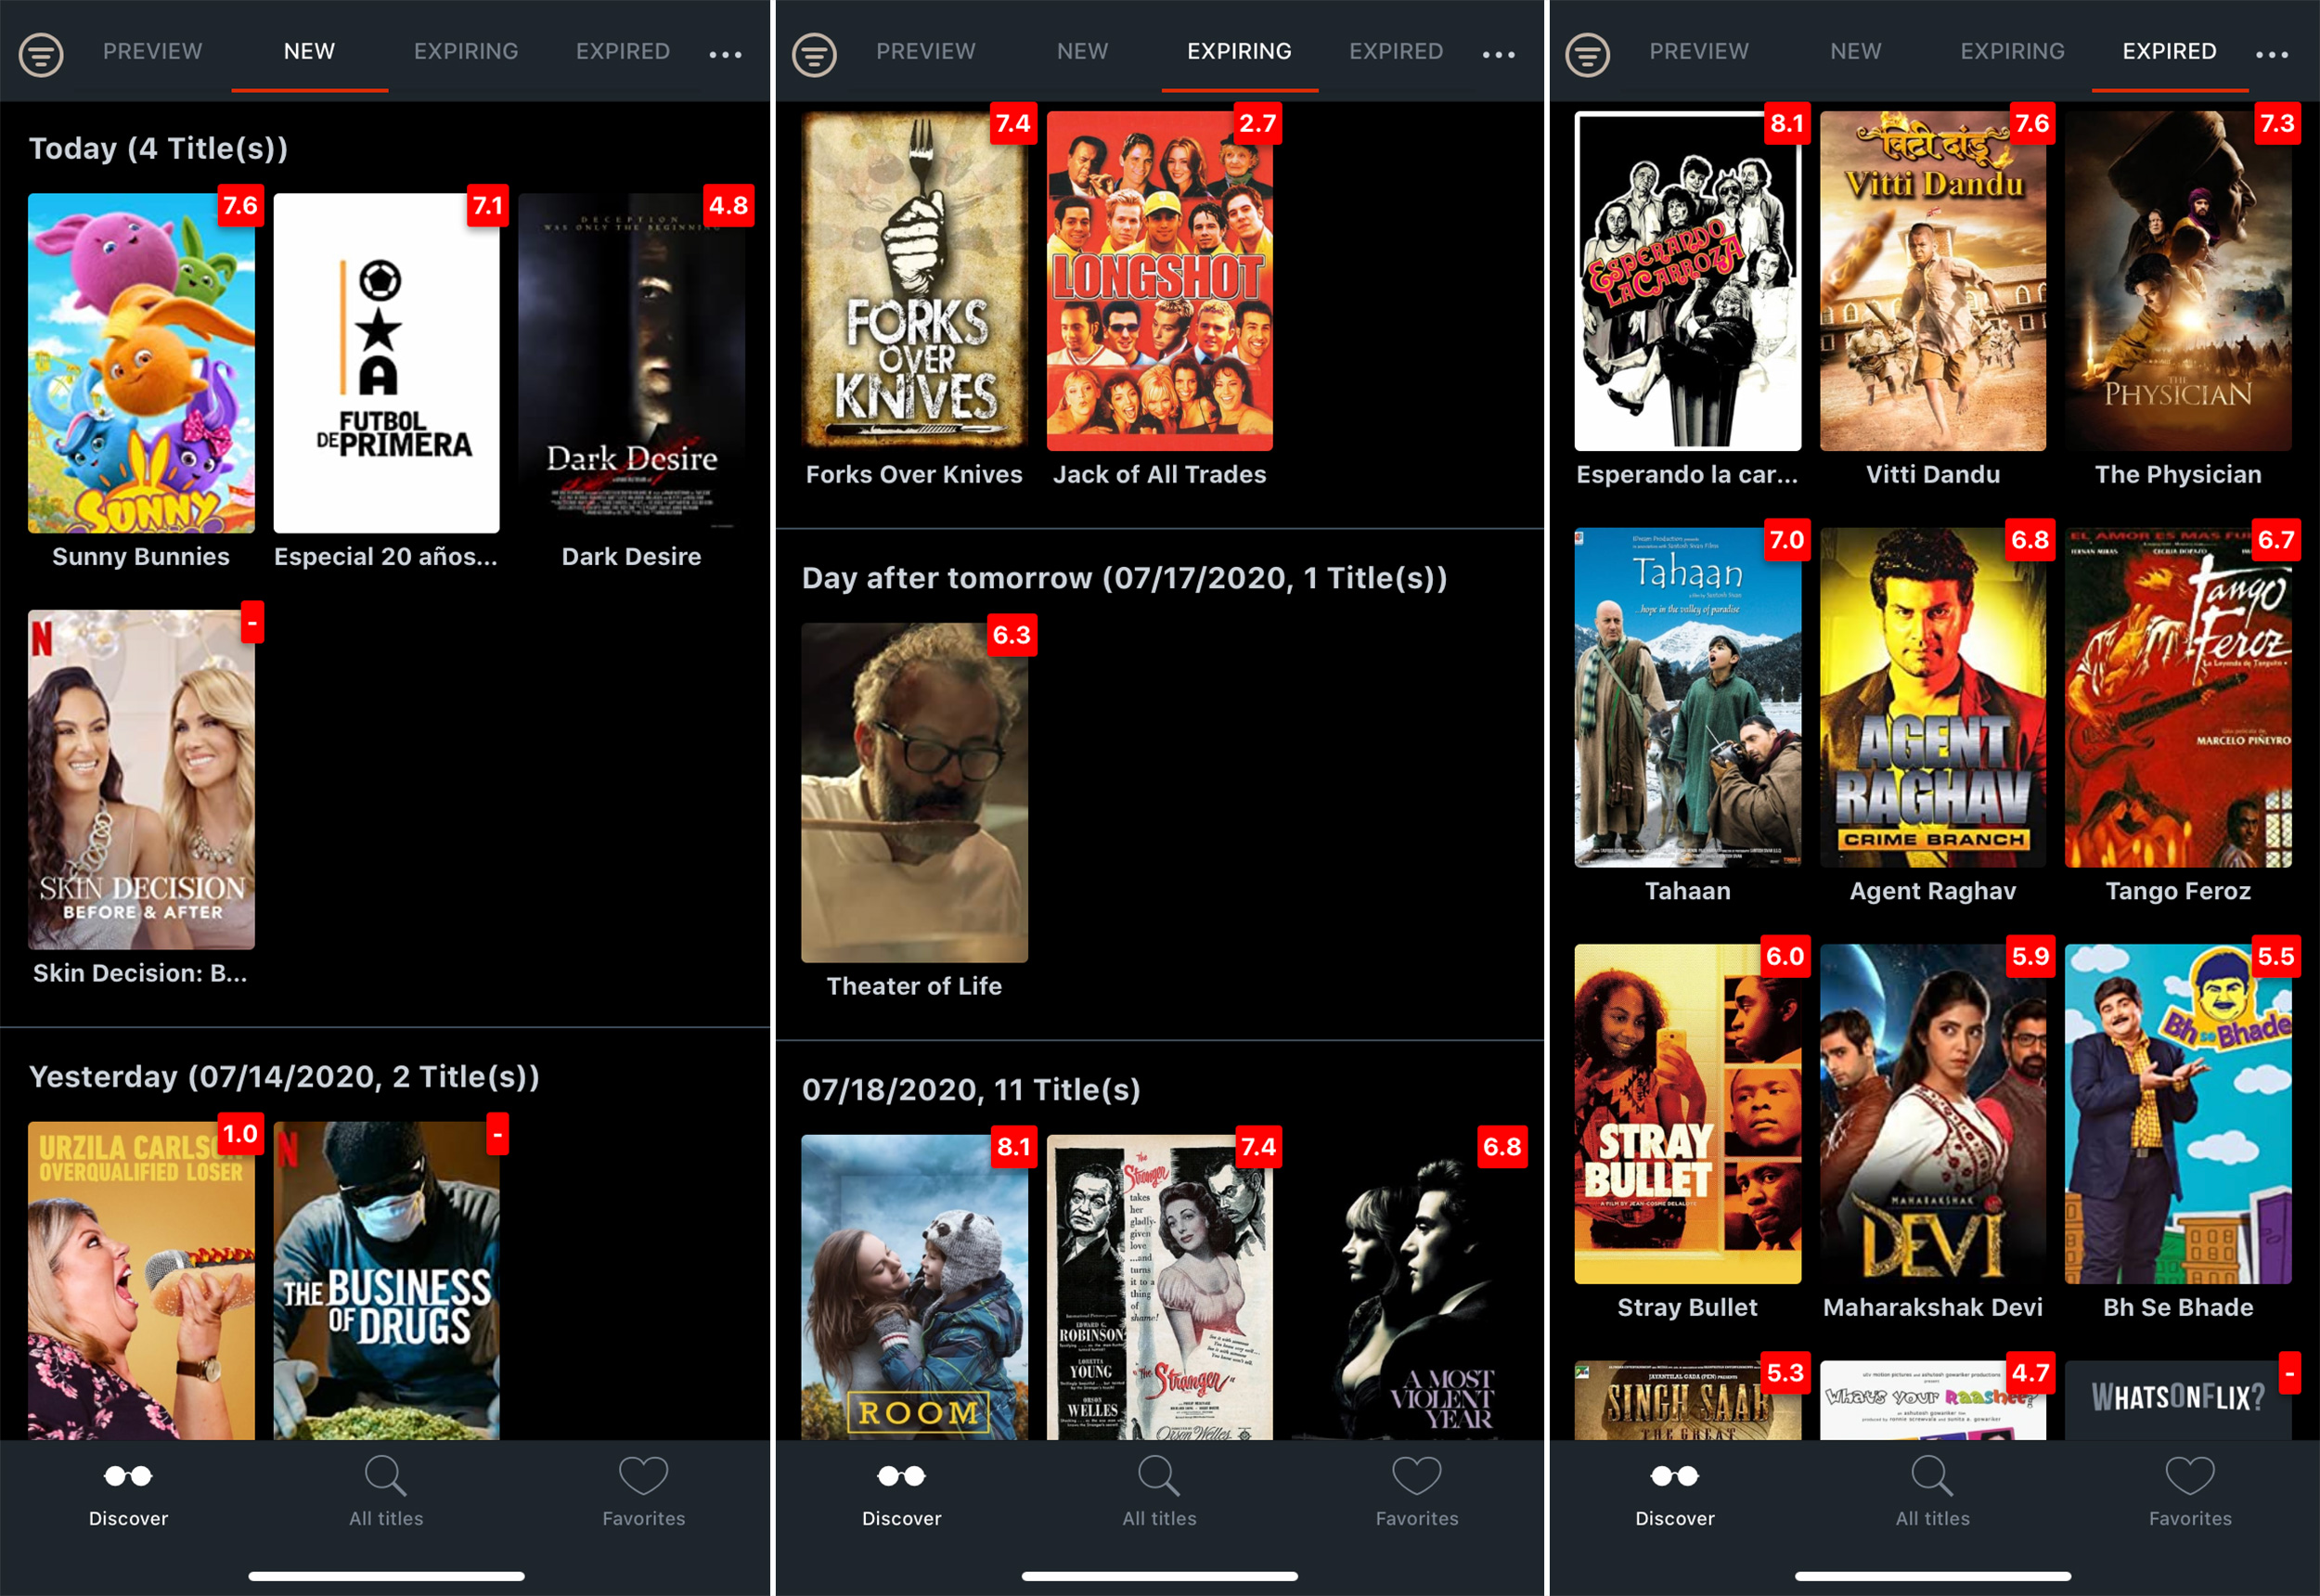 whats on flix ios app 02